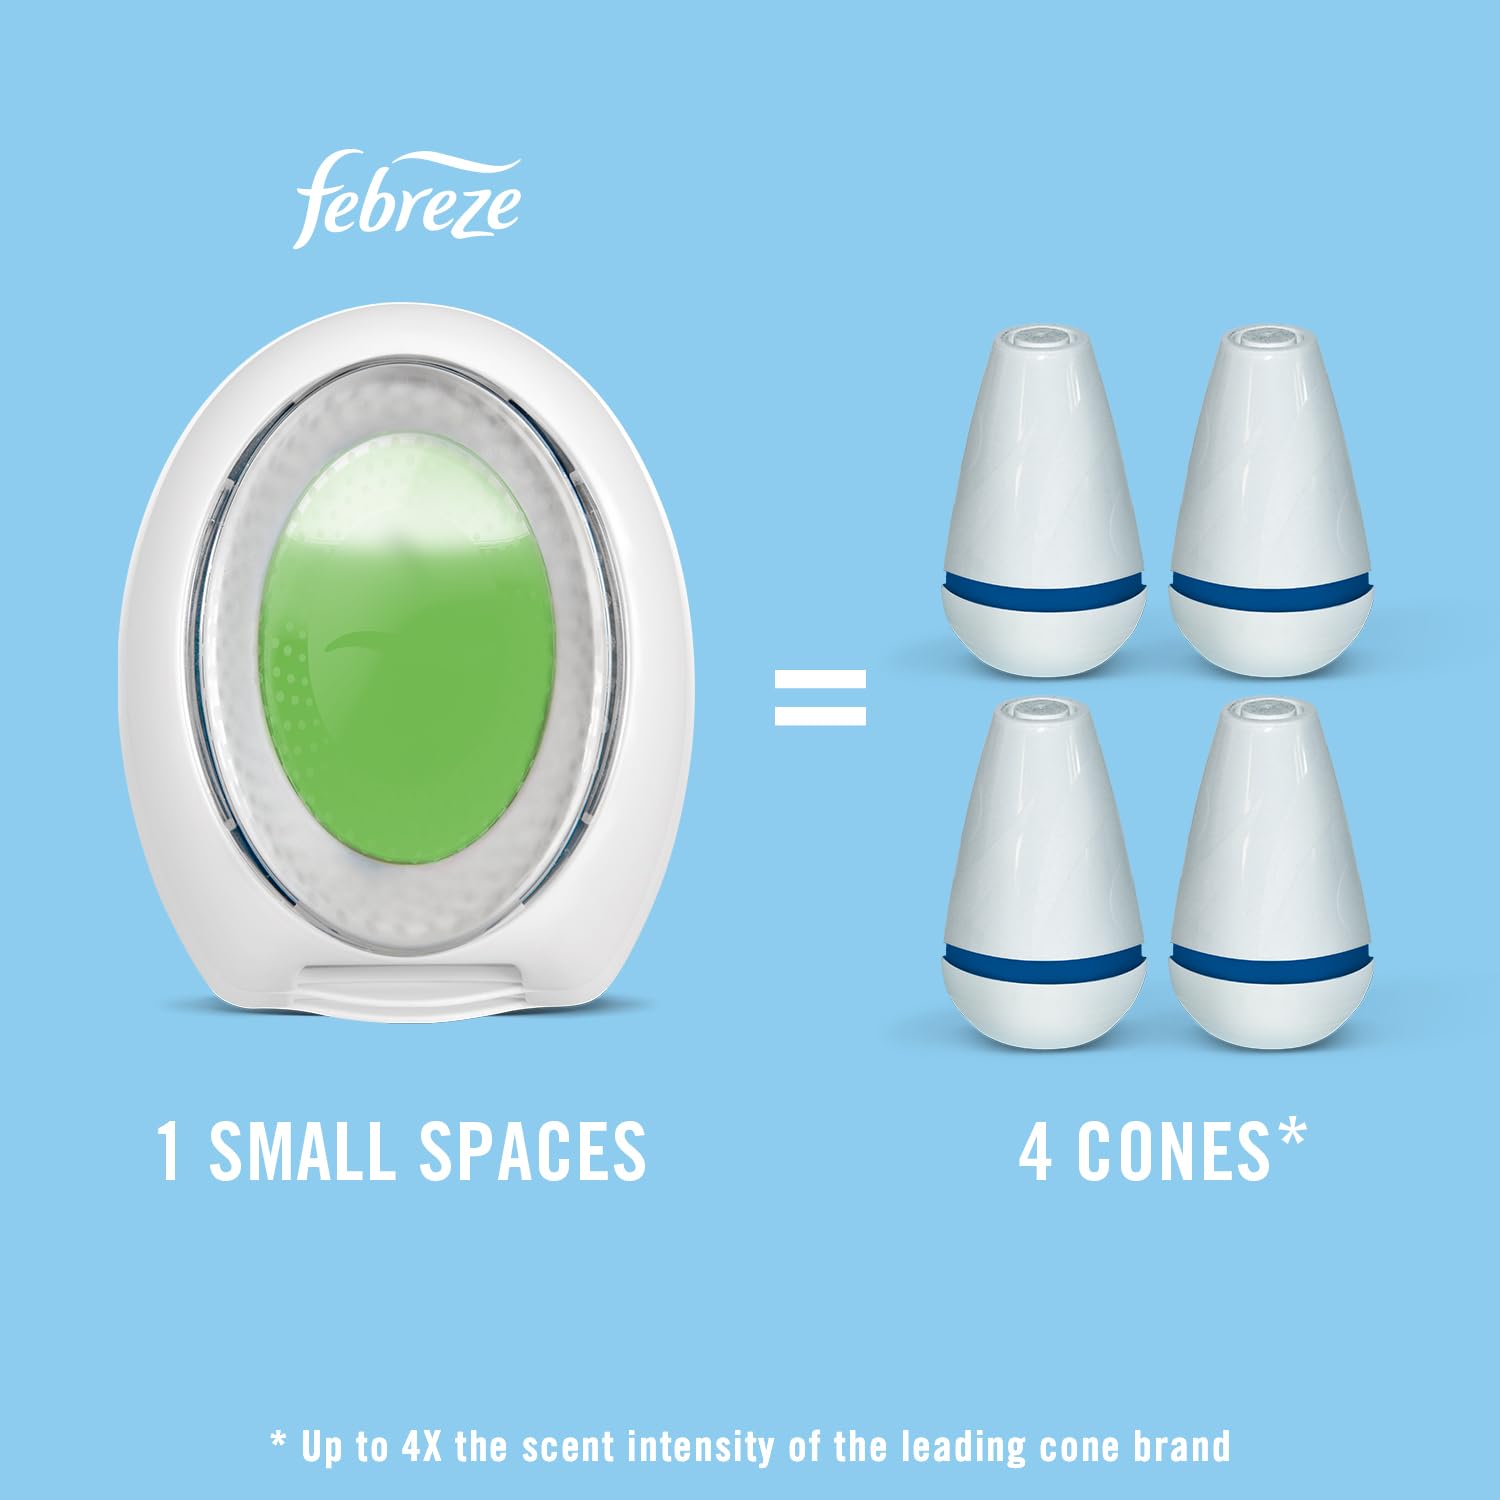 Febreze Small Spaces Air Freshener, Plug in Alternative Air Freshener for Home Long Lasting, Gain Original Scent, Bathroom Air Freshener, Closet Air Fresheners, Odor Fighter for Strong Odor (4 Count)